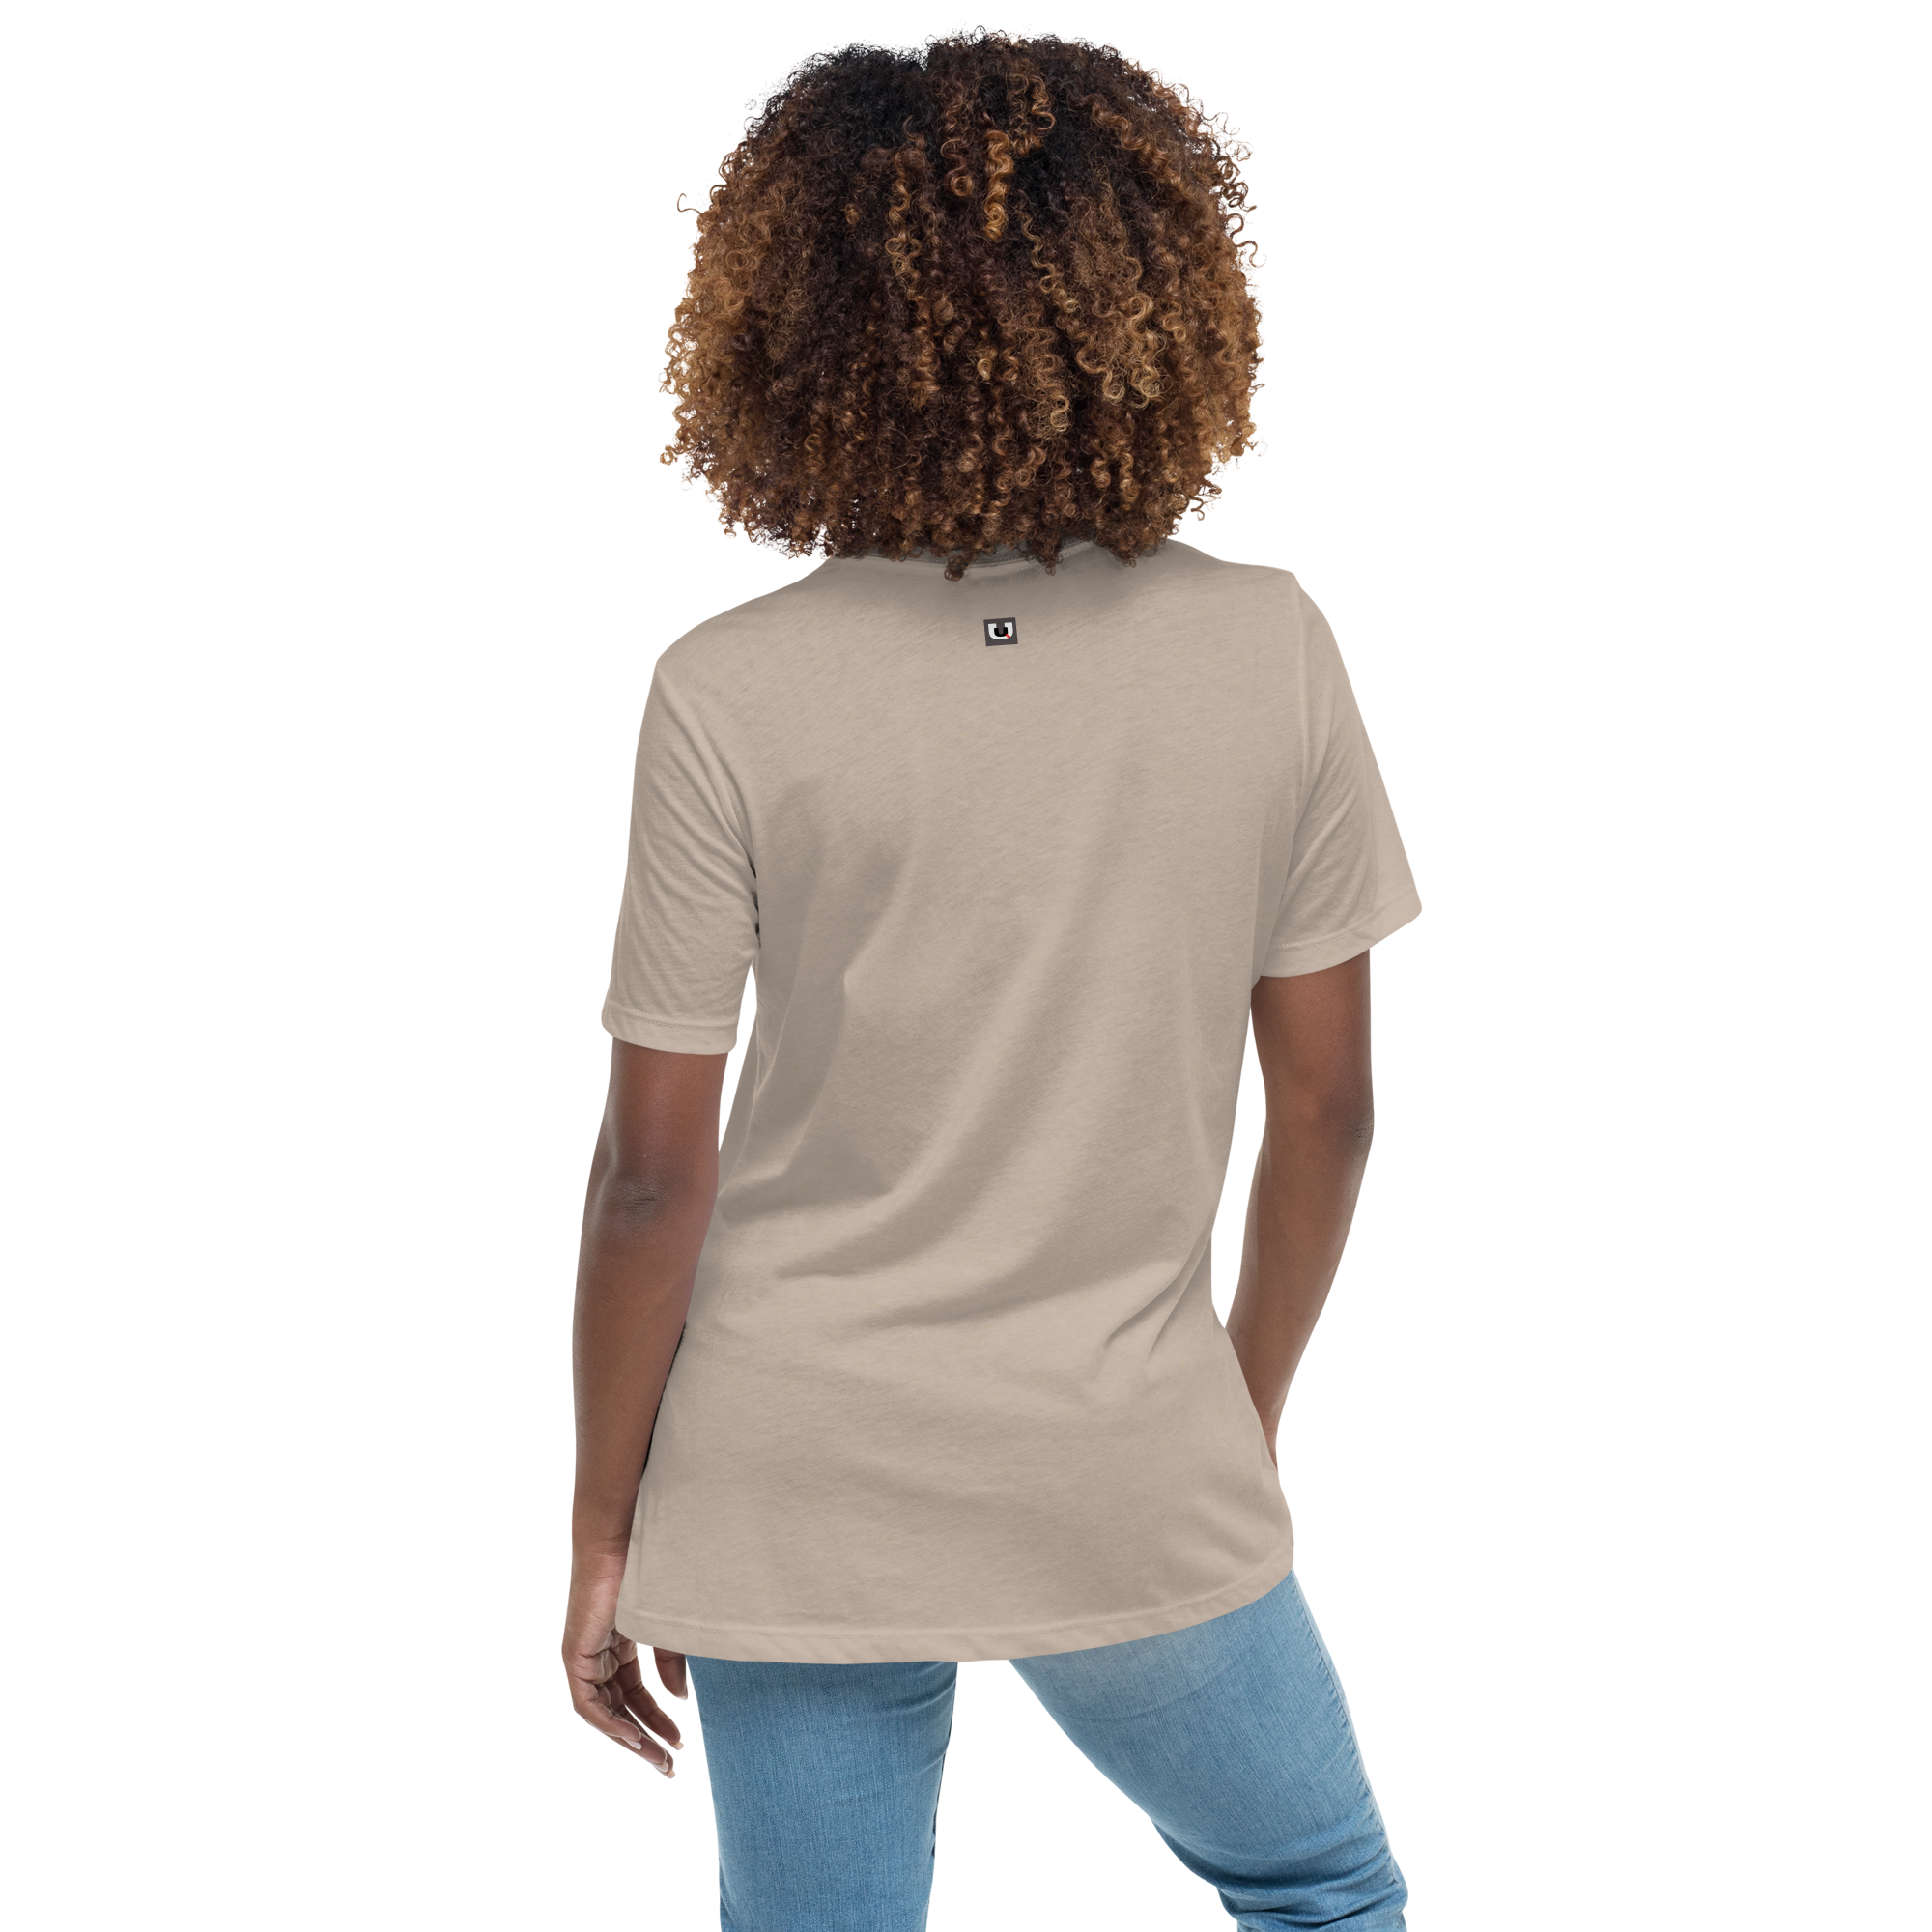 Strong and Beautiful Women's Relaxed T-Shirt